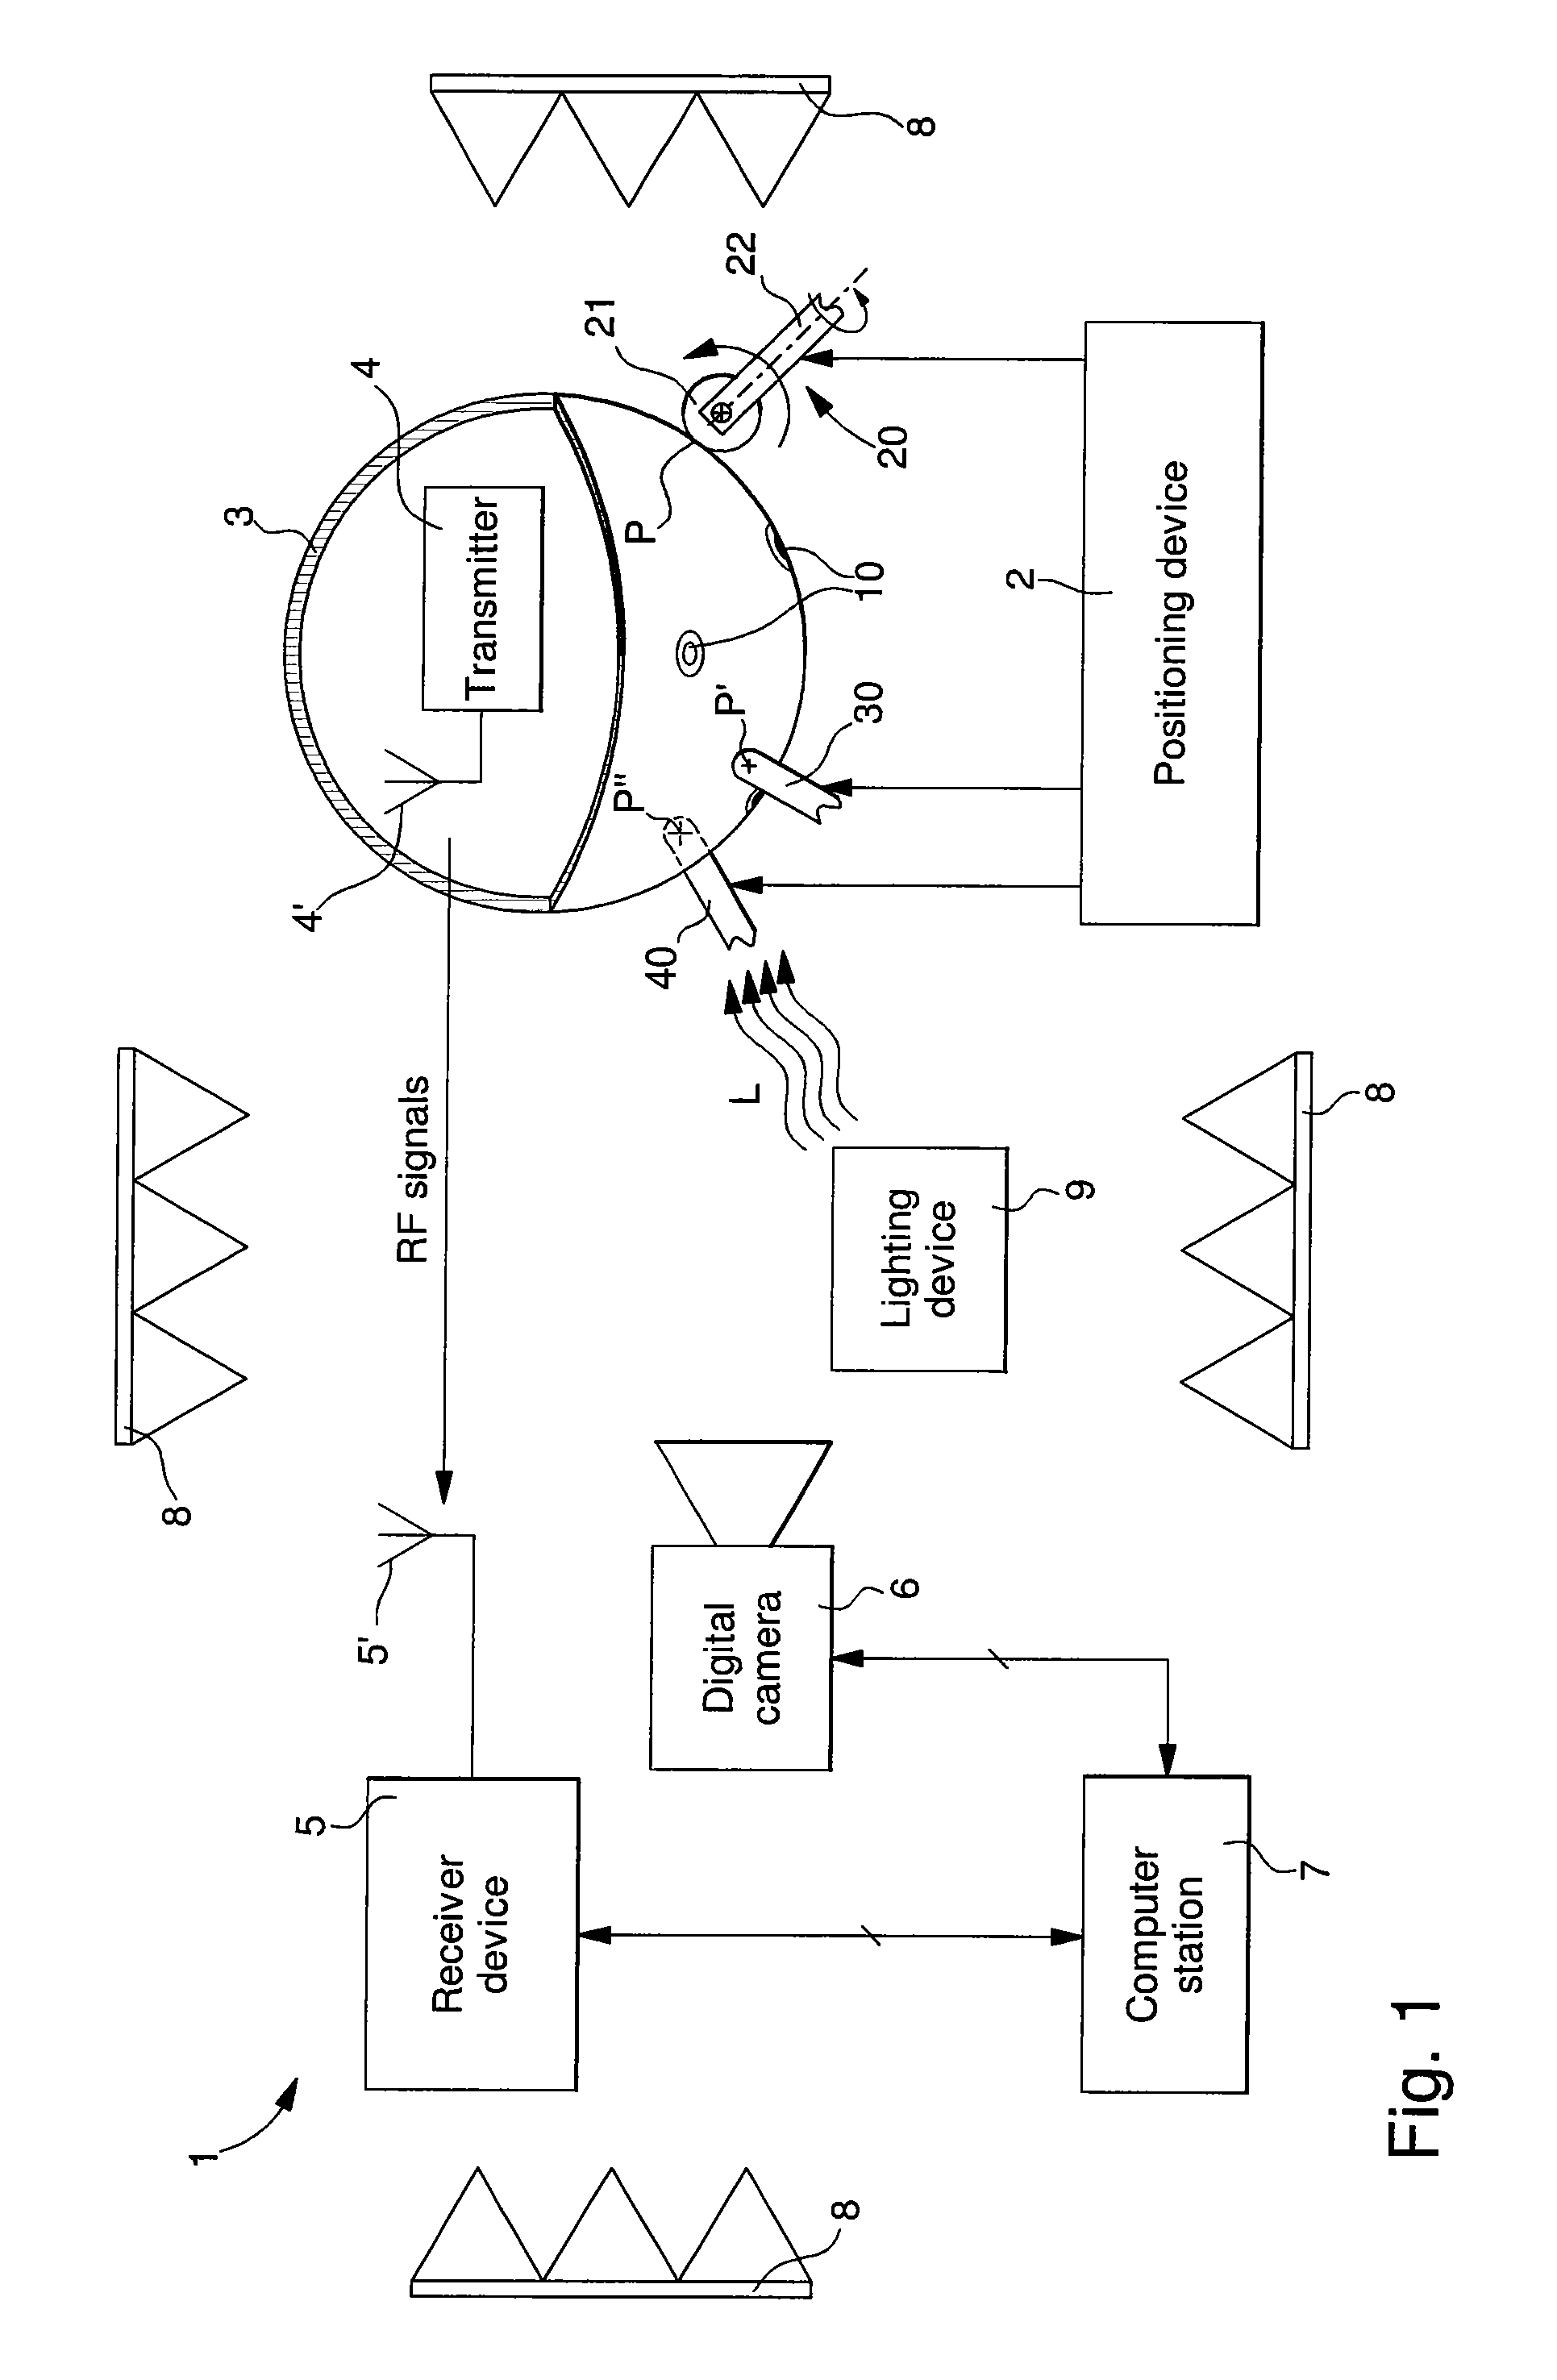 System for optical recognition of the position and movement of an object on a positioning device